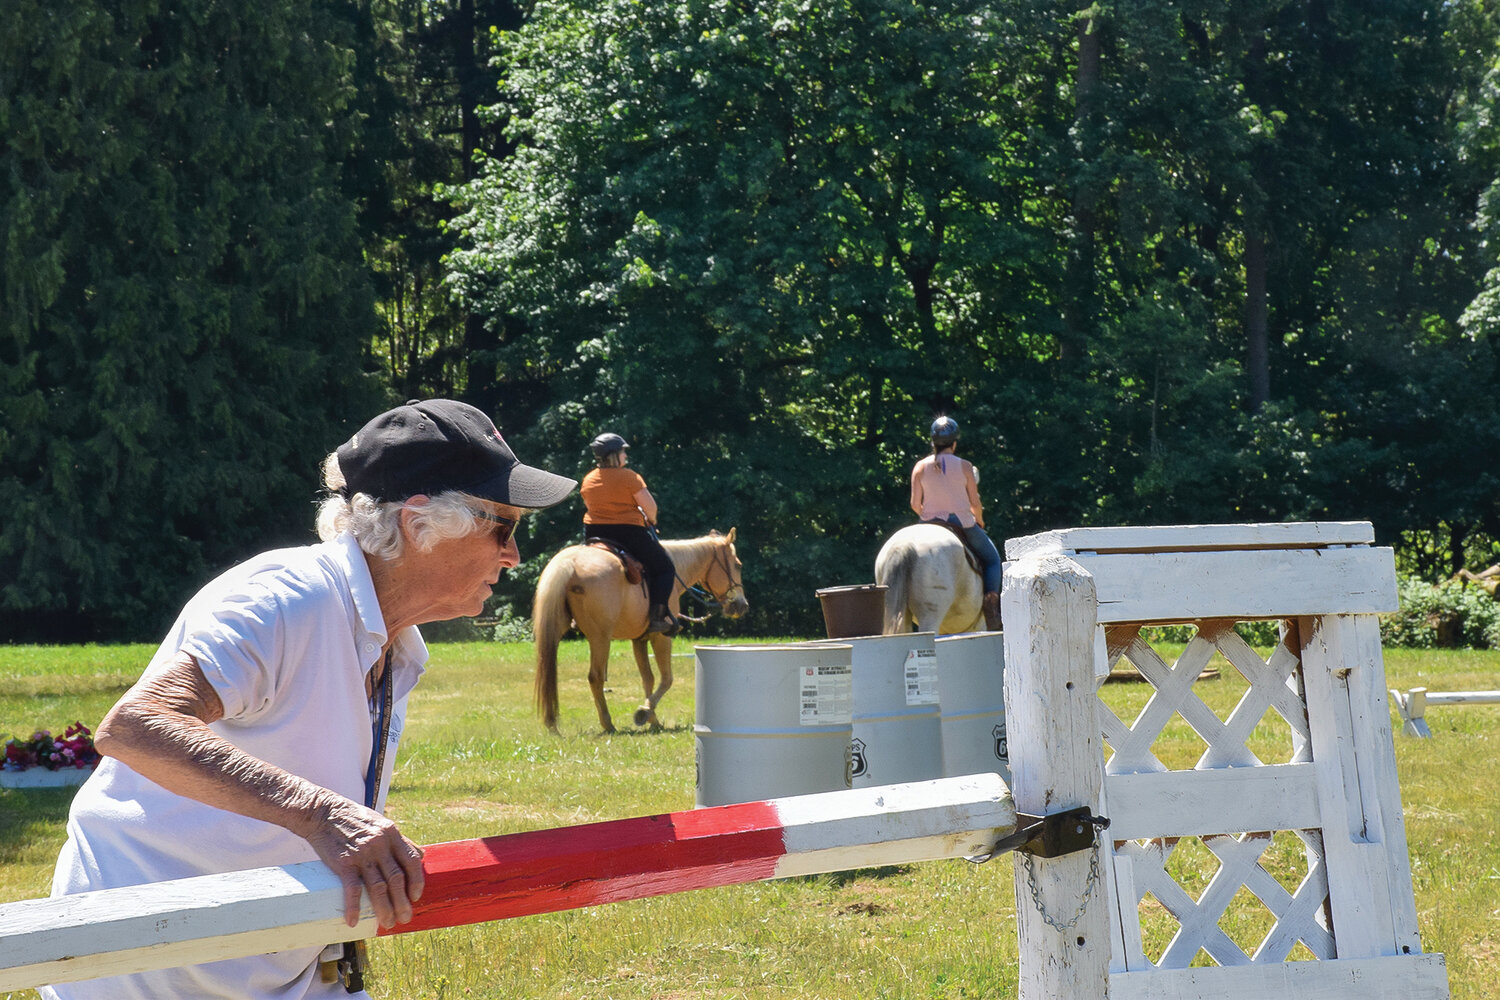 Fran Duncan adjusts an obstacle during the Clark County Saddle Club’s trail course event on June 3.